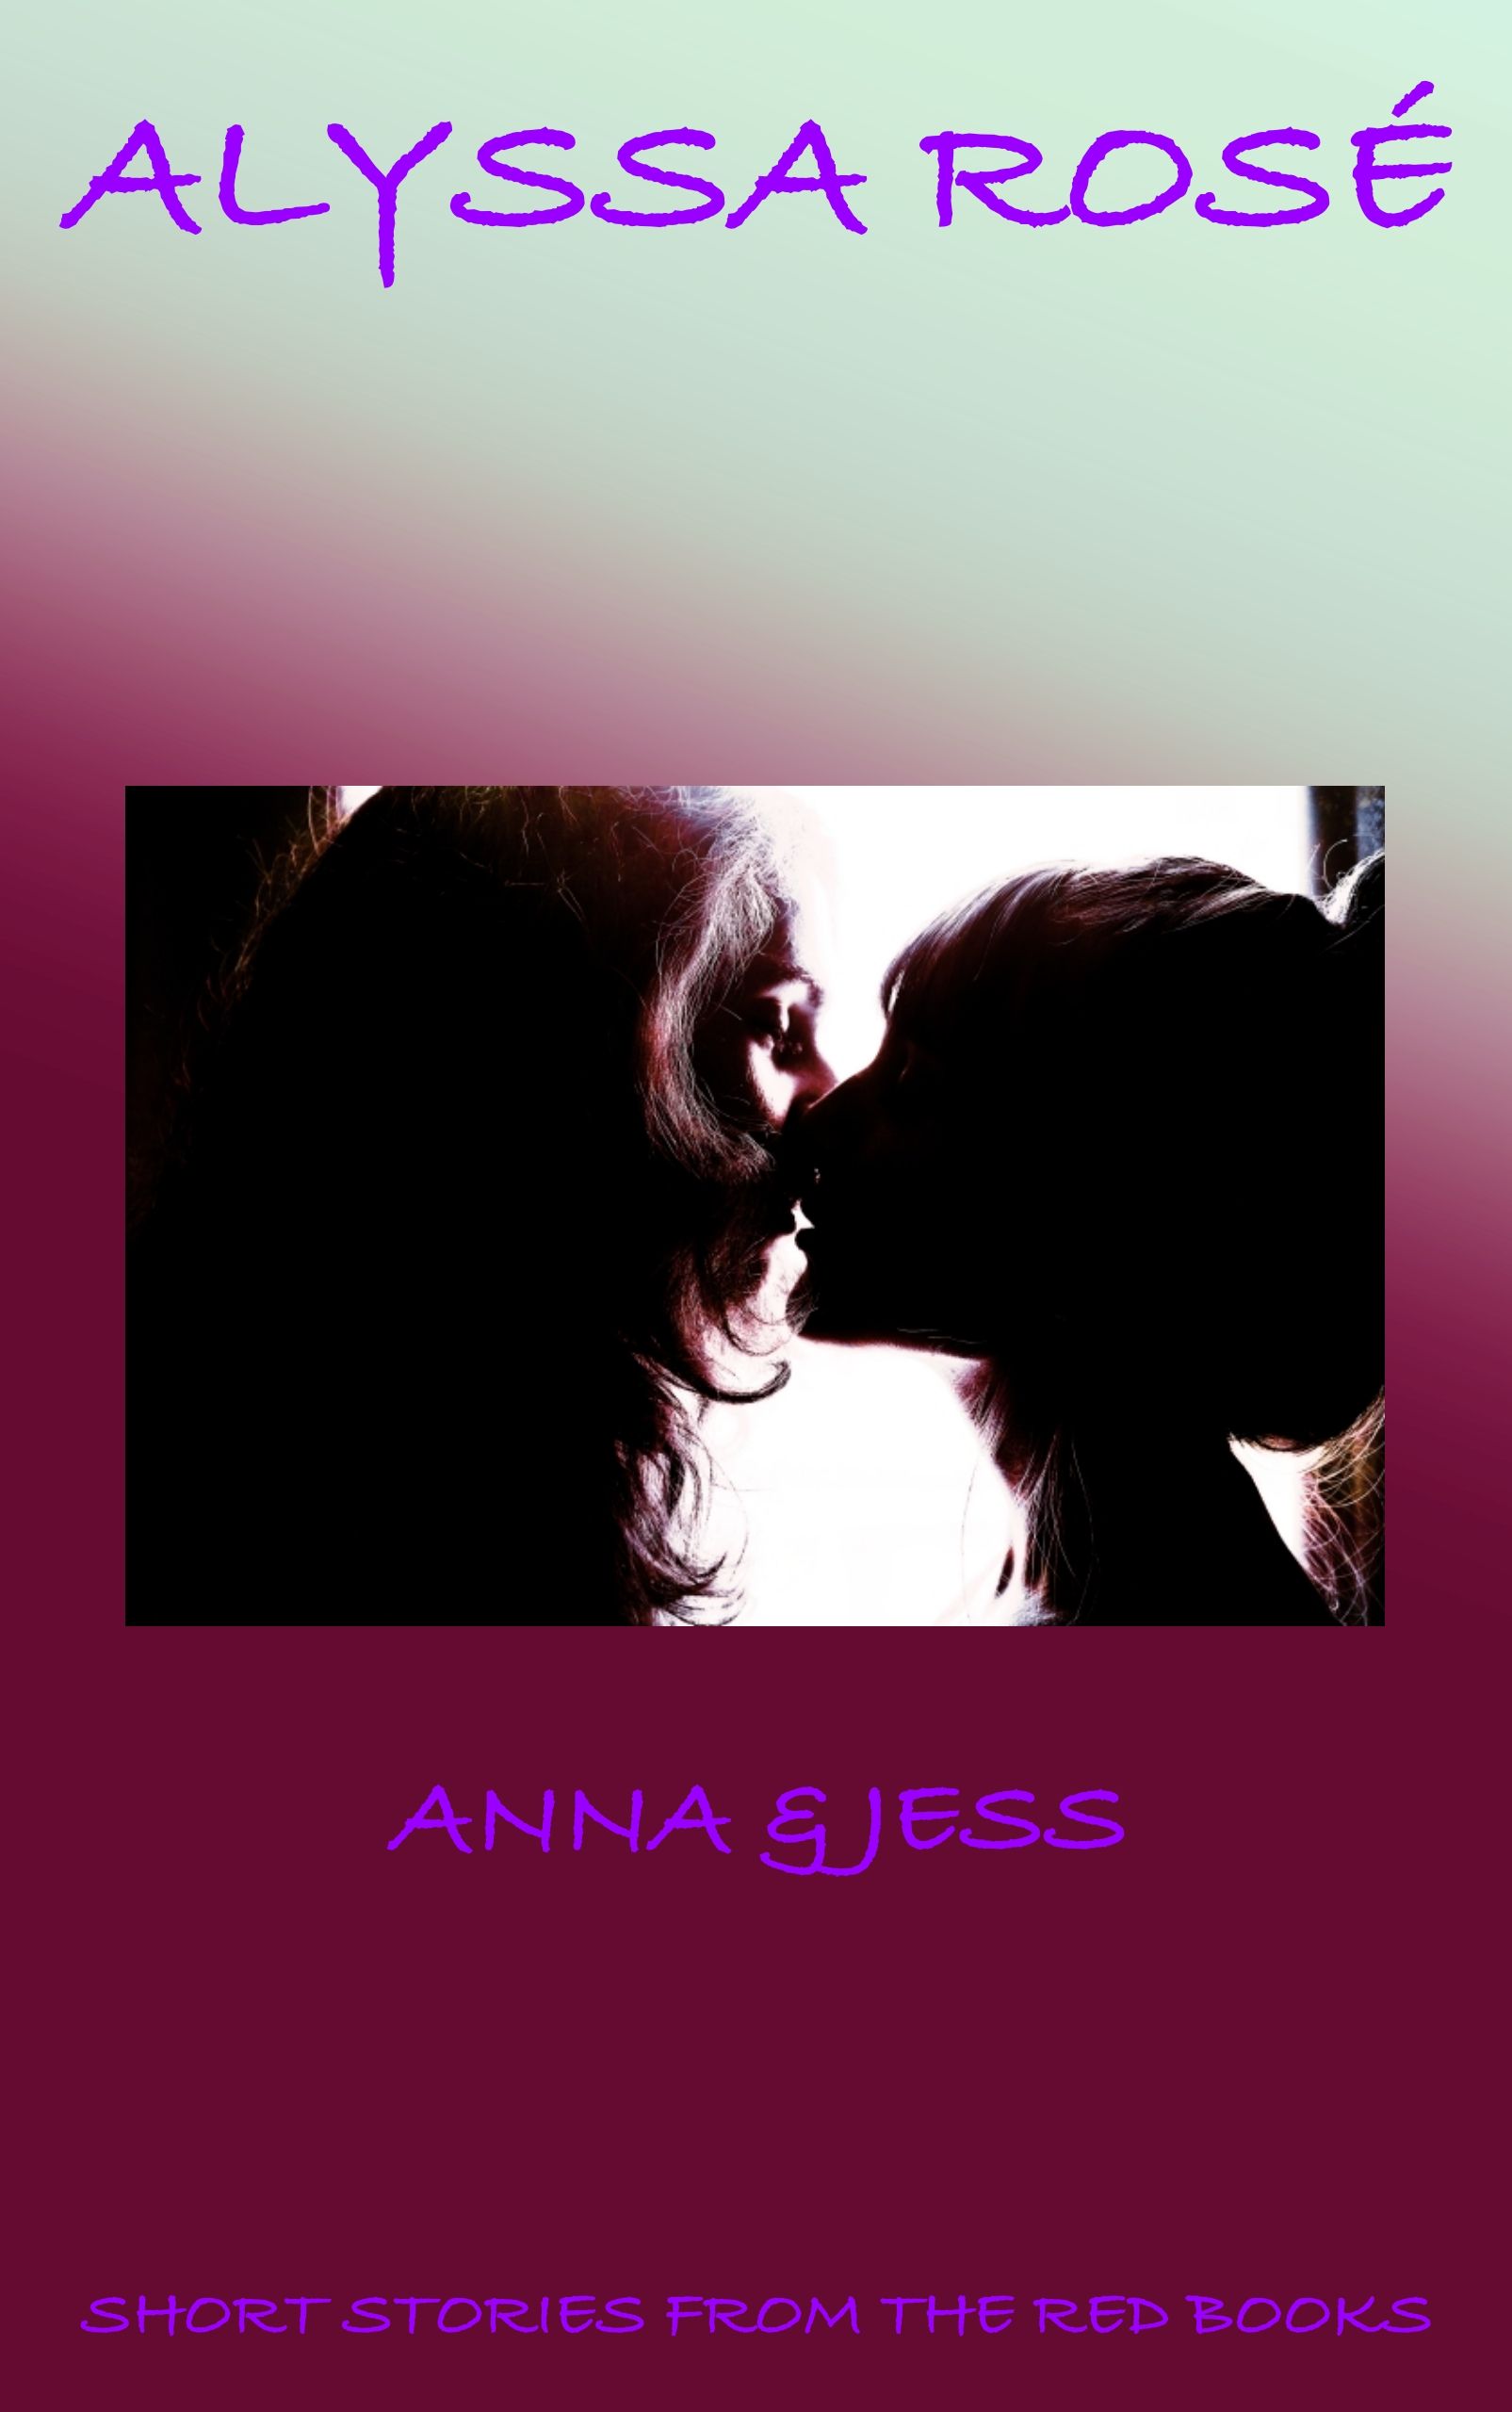 Short Stories From The Red Books: Anna & Jess's Book Image